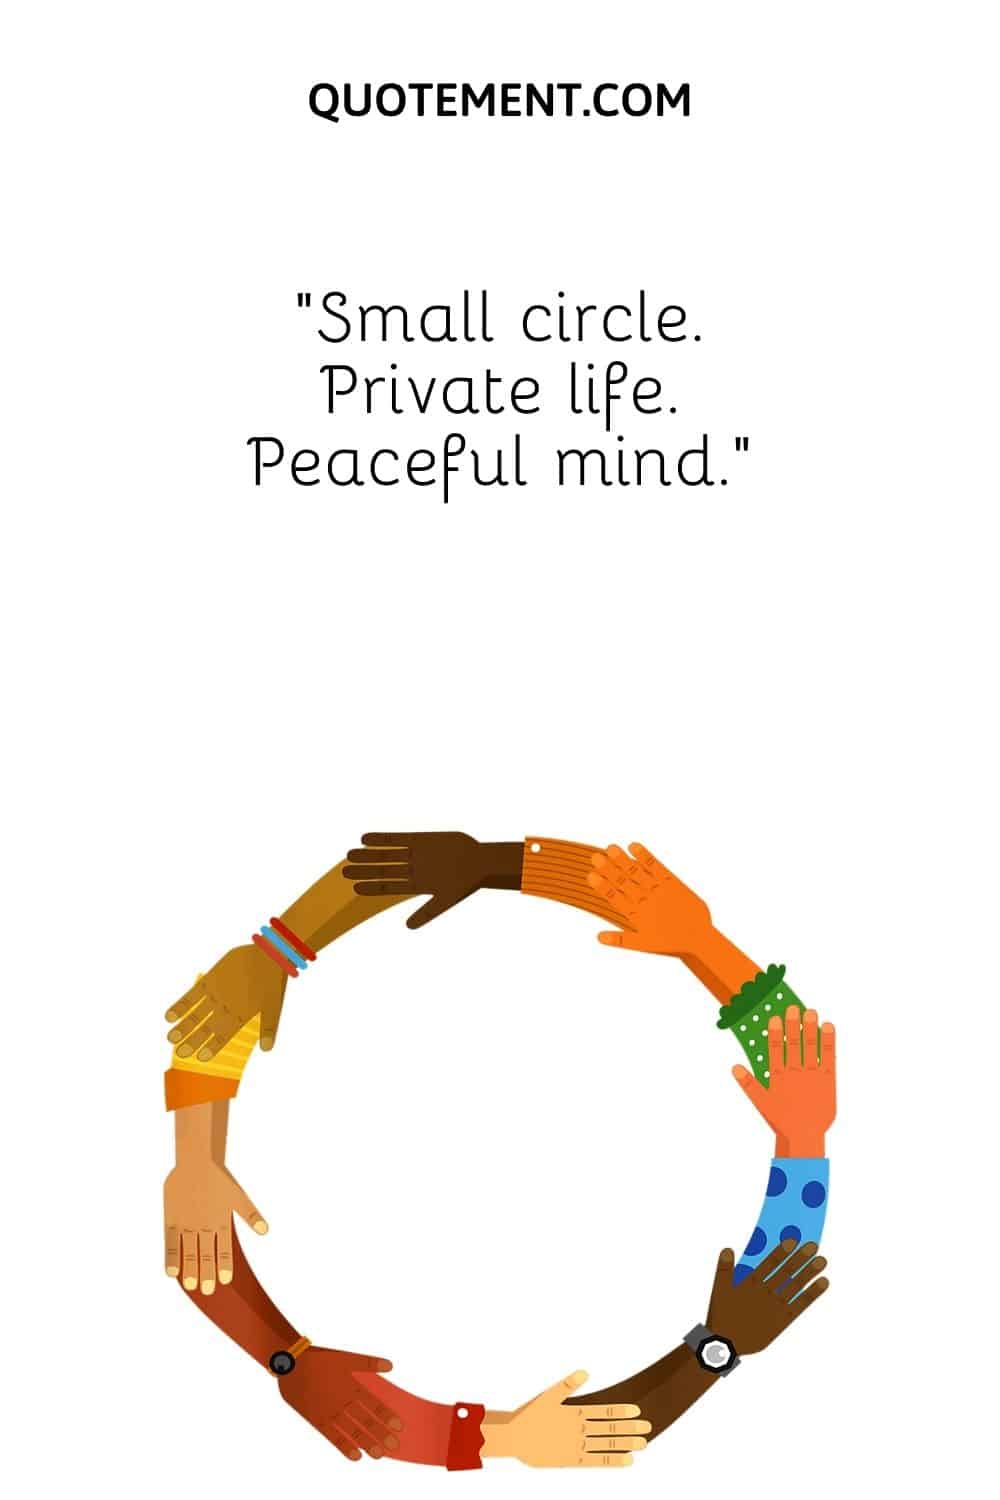 “Small circle. Private life. Peaceful mind.”